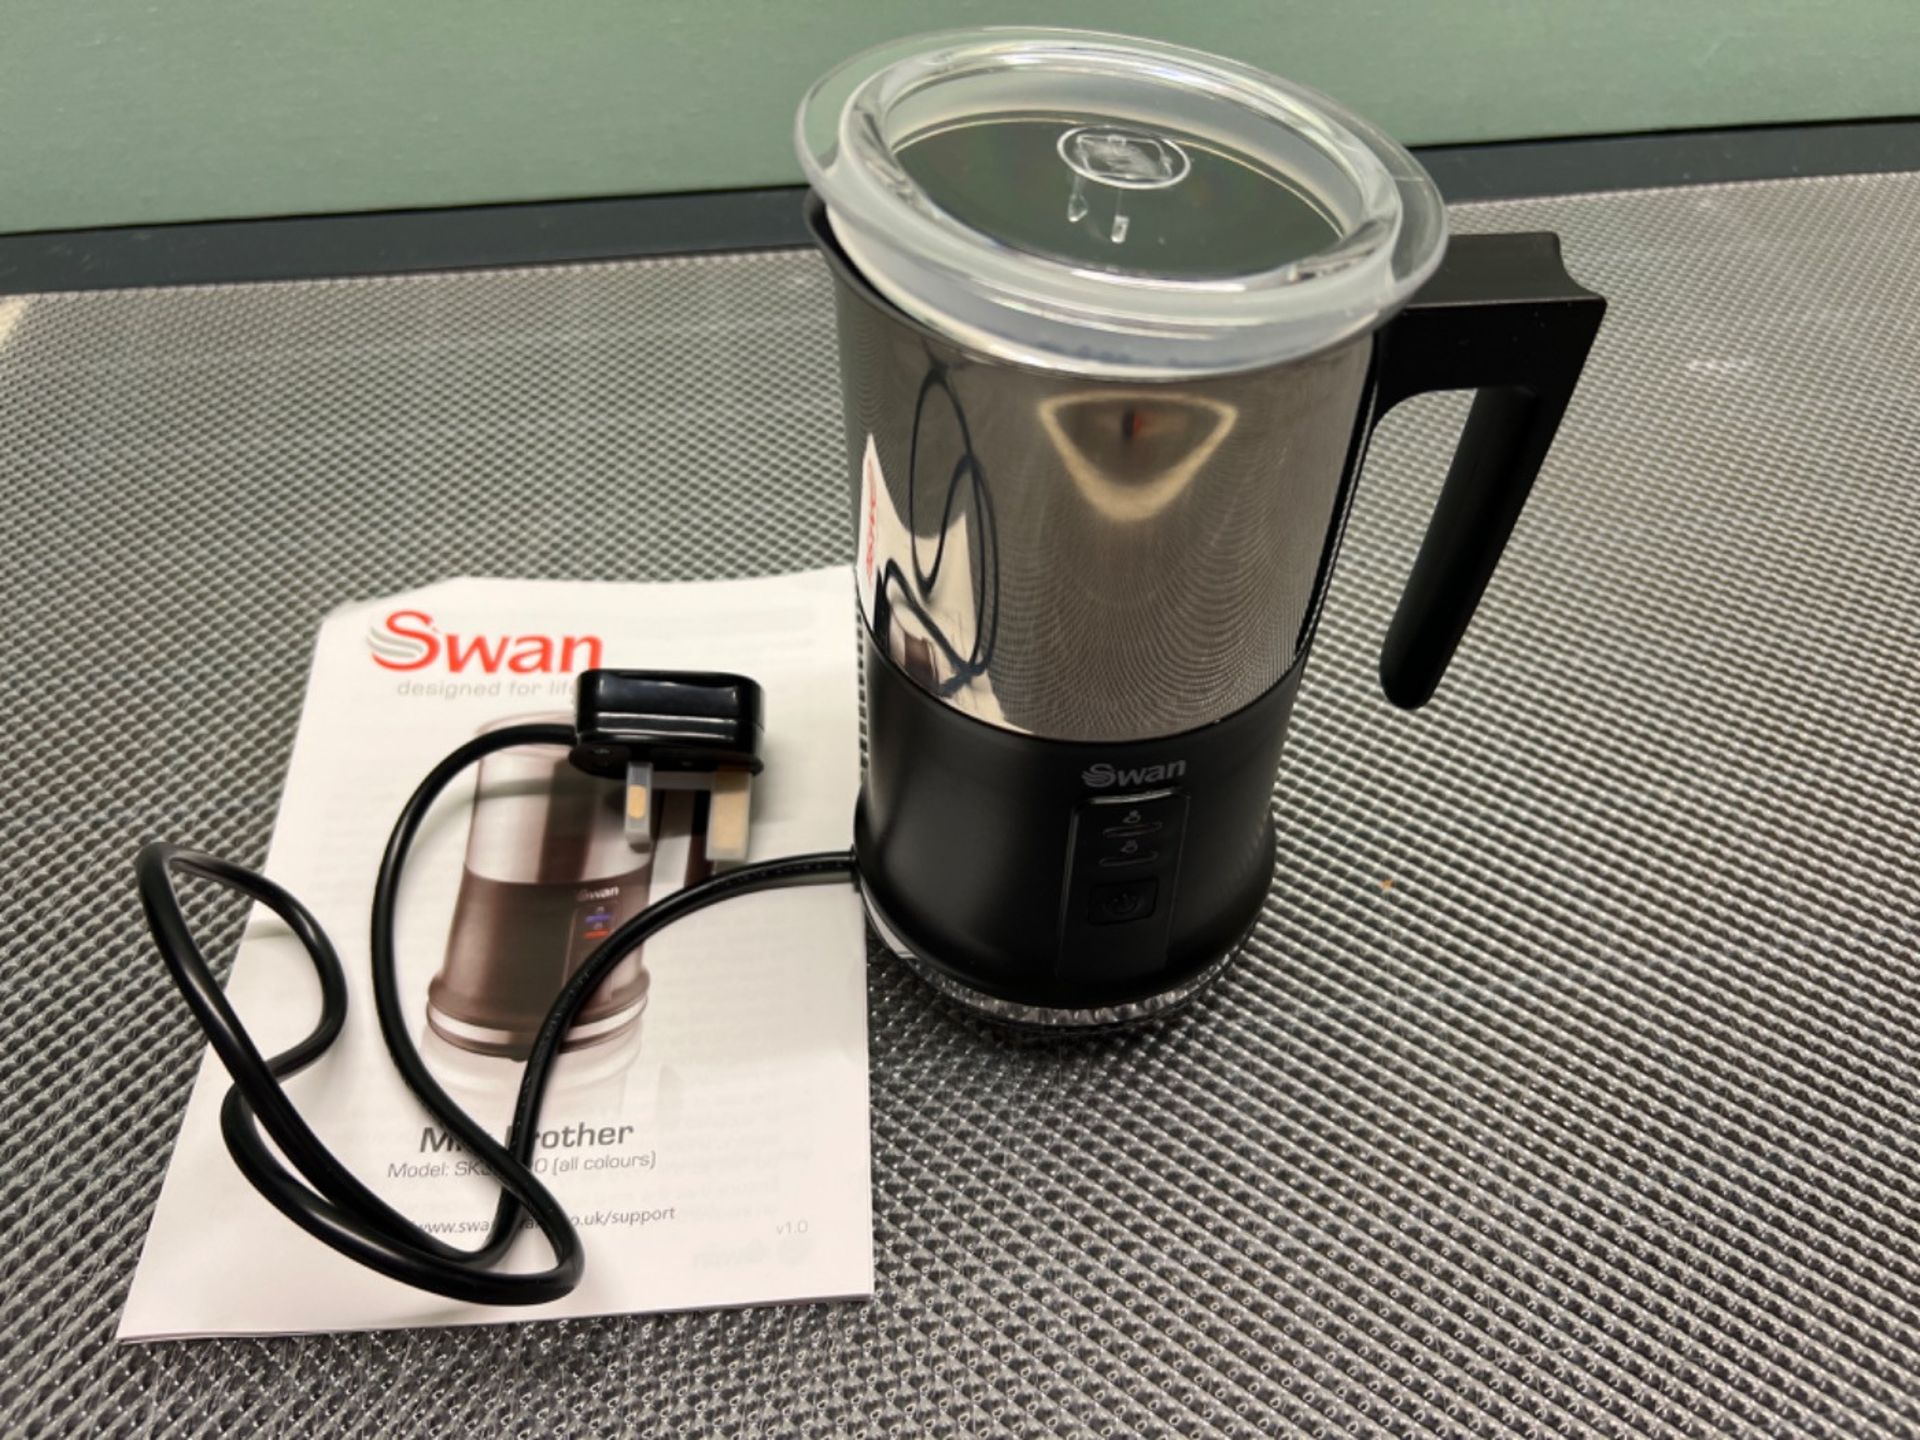 Swan, Automatic Milk Frother and Warmer, 2 Layer Non-Stick Coating, 500W, 500 W, Black - Image 2 of 3